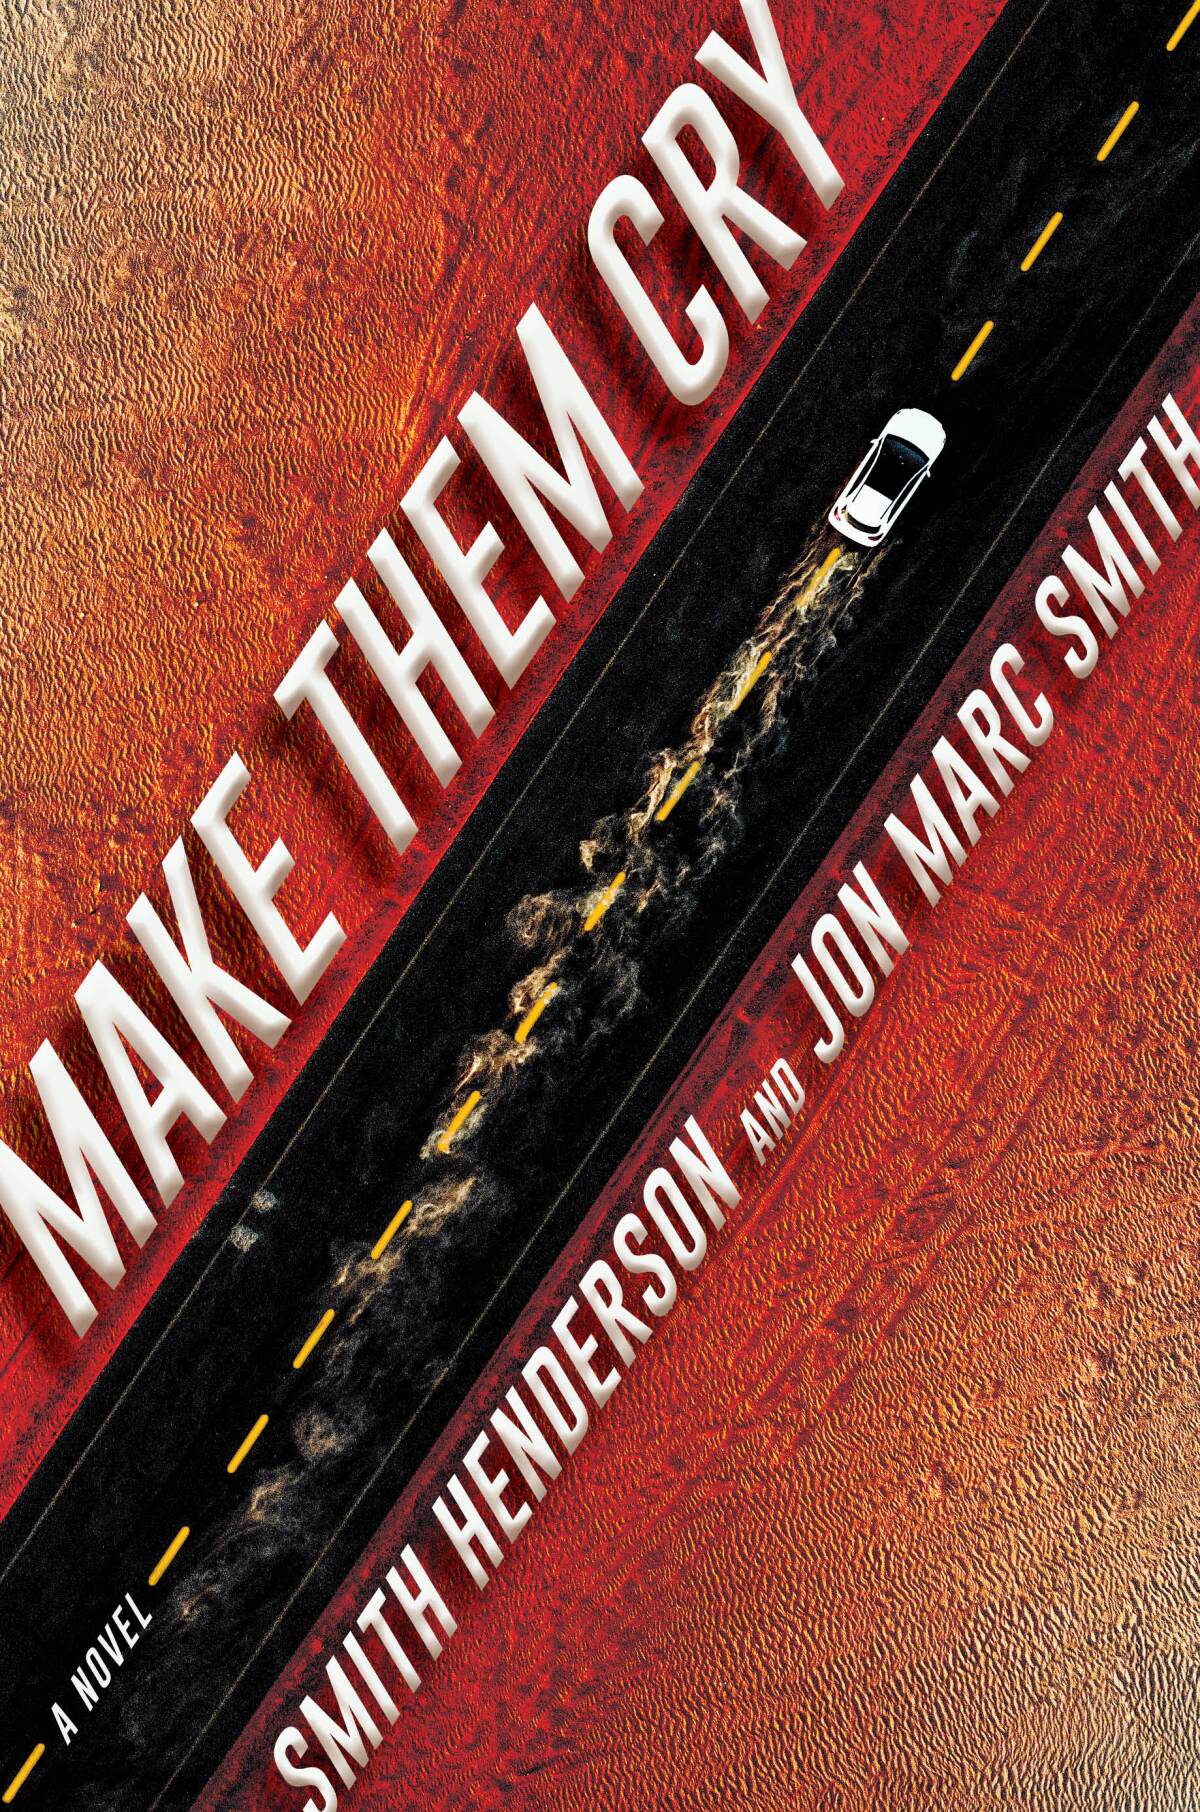 Book jacket for Jon Marc Smith and Smith Henderson's tag-team thriller, "Make Them Cry."